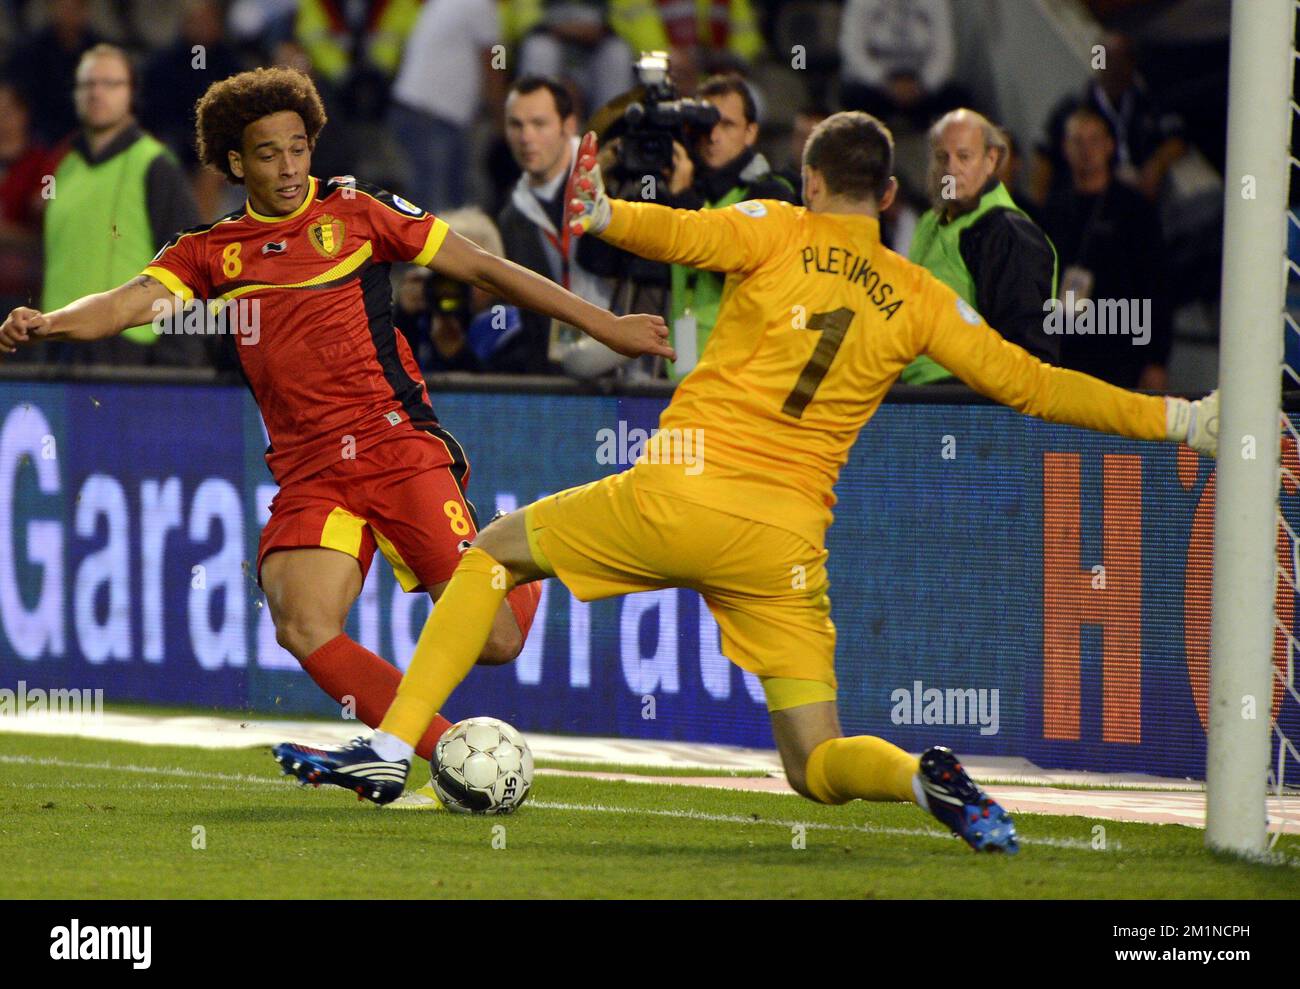 20120911 - BRUSSELS, BELGIUM: Belgium's Axel Witsel and Croatian's goalkeeper Stipe Pletikosa in action during the qualifying match between Belgium Red Devils and Croatia, Tuesday 11 September 2012 at the King Baudouin stadium, in Brussels. This is the second of ten qualifying games for the 2014 Soccer World Championships. BELGA PHOTO ERIC LALMAND Stock Photo